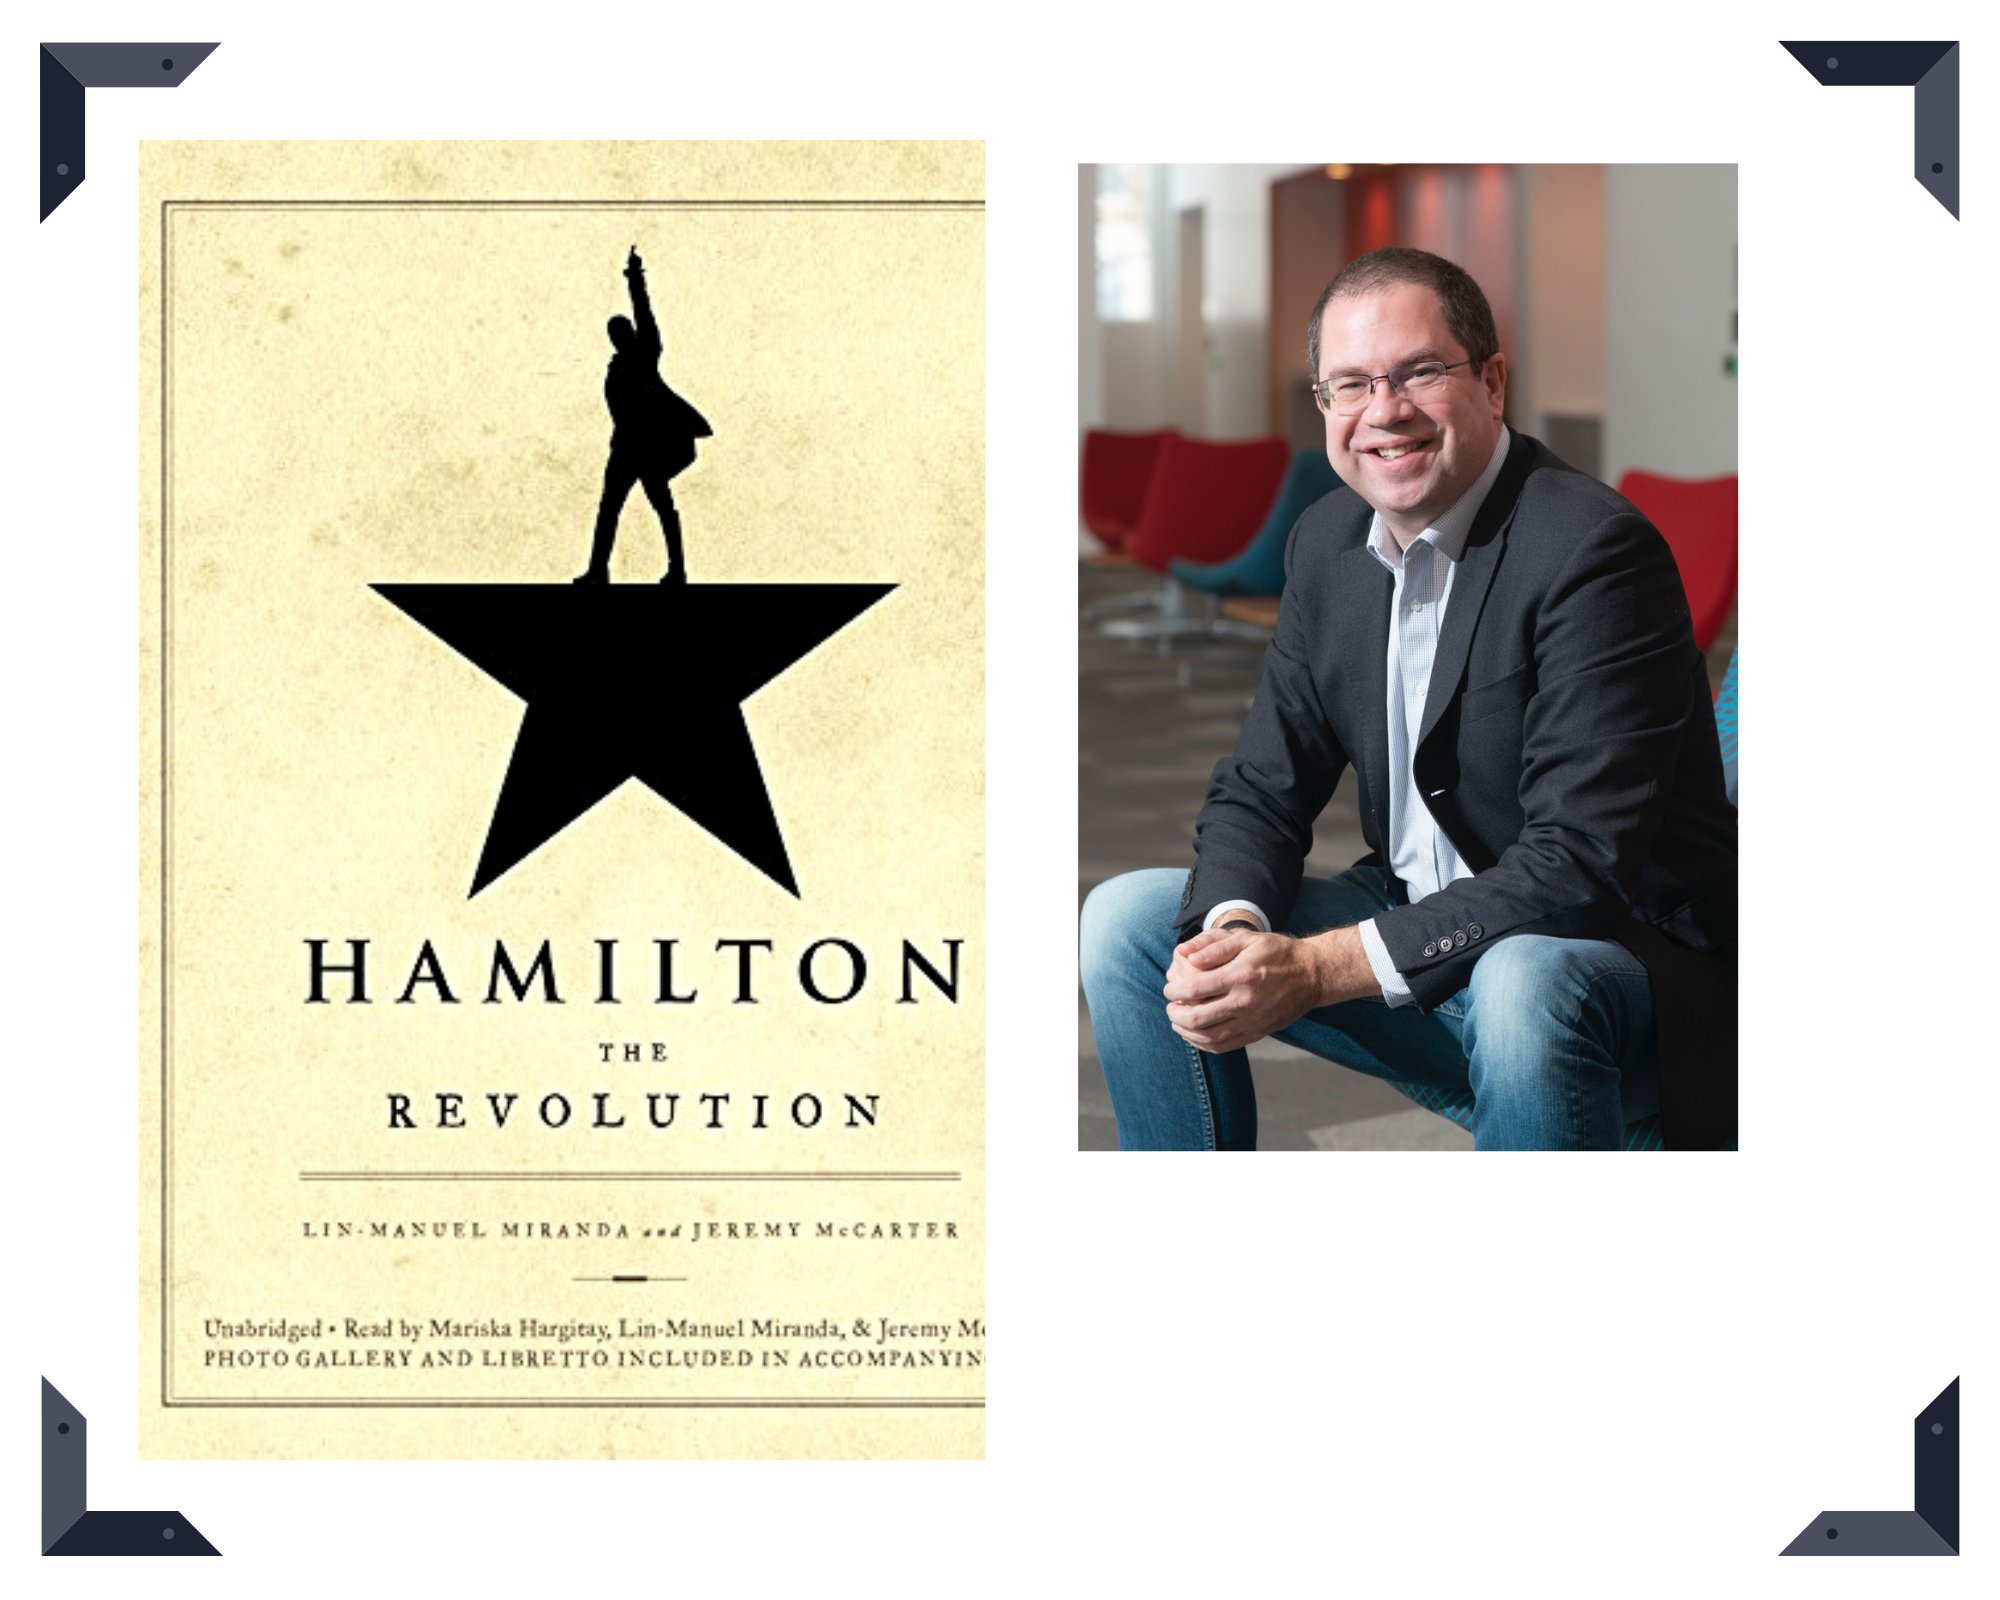 Hamilton logo. a black star on a golden background with the figure of a person standing on the star.